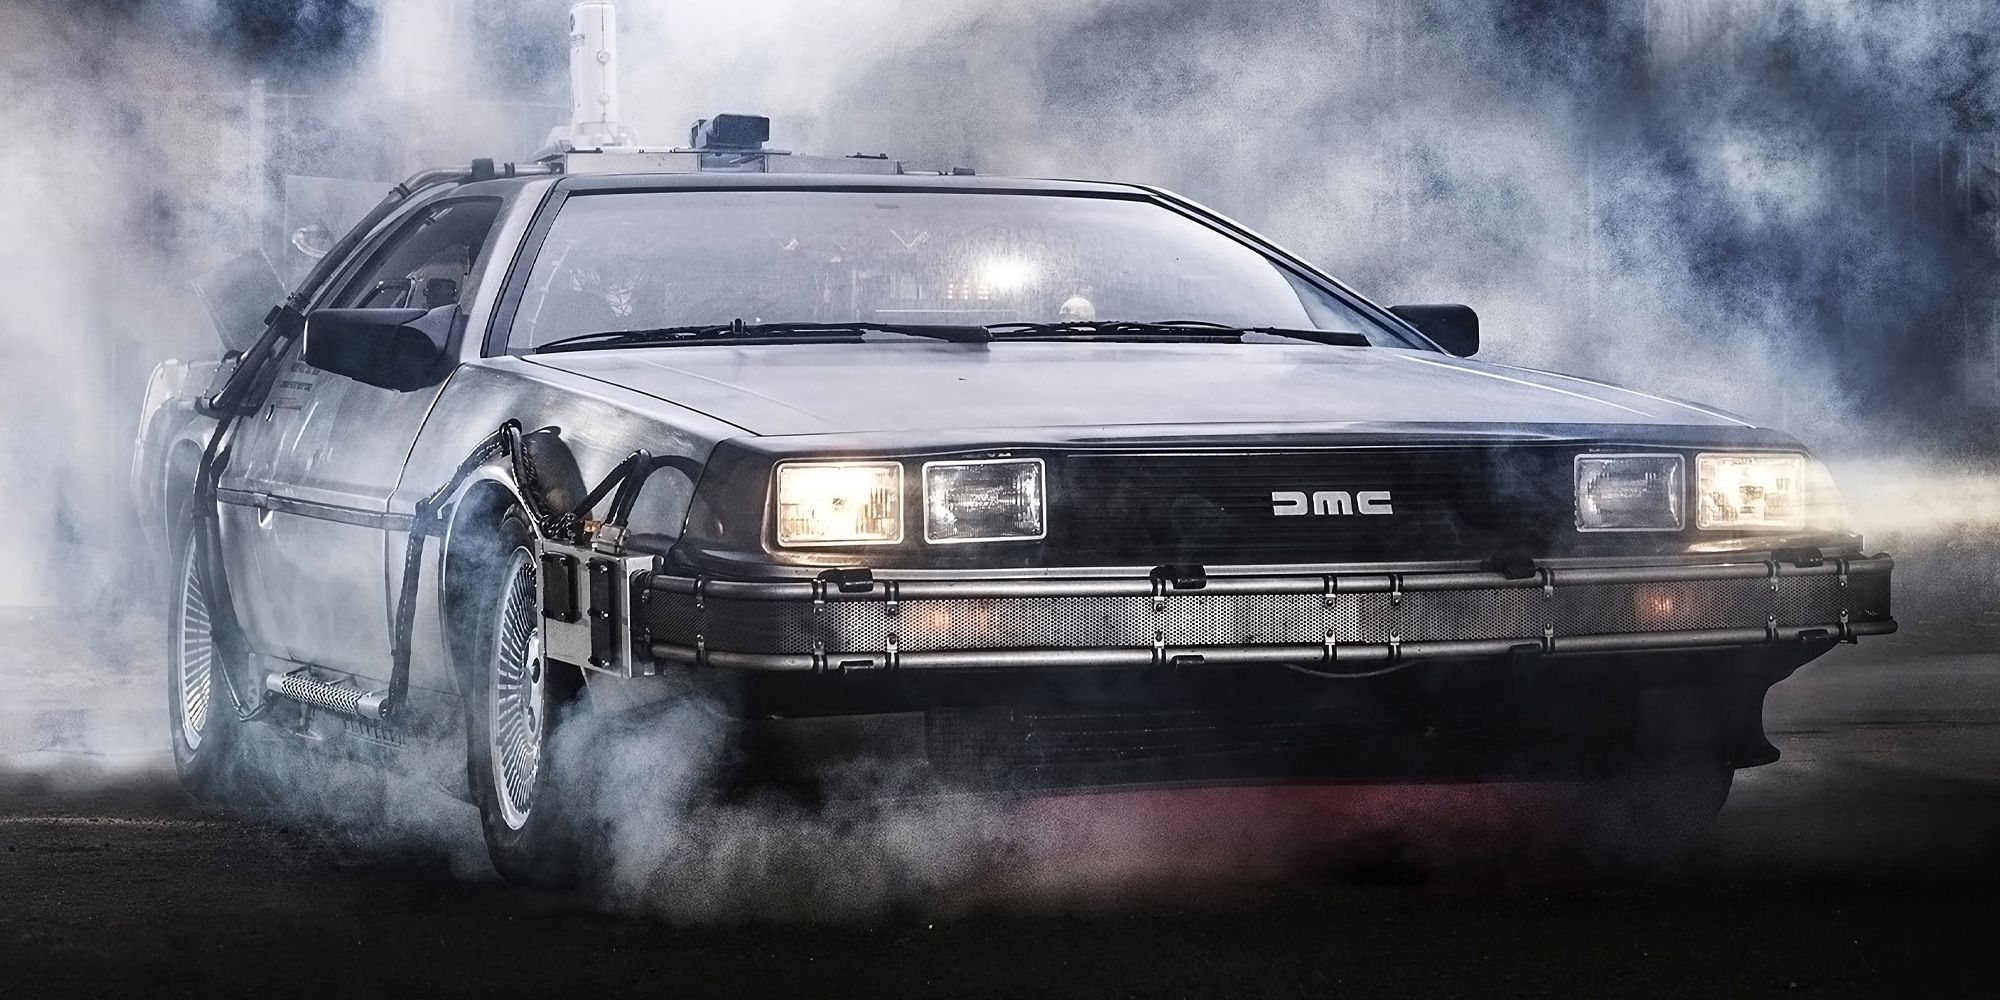 The front of the DeLorean time machine